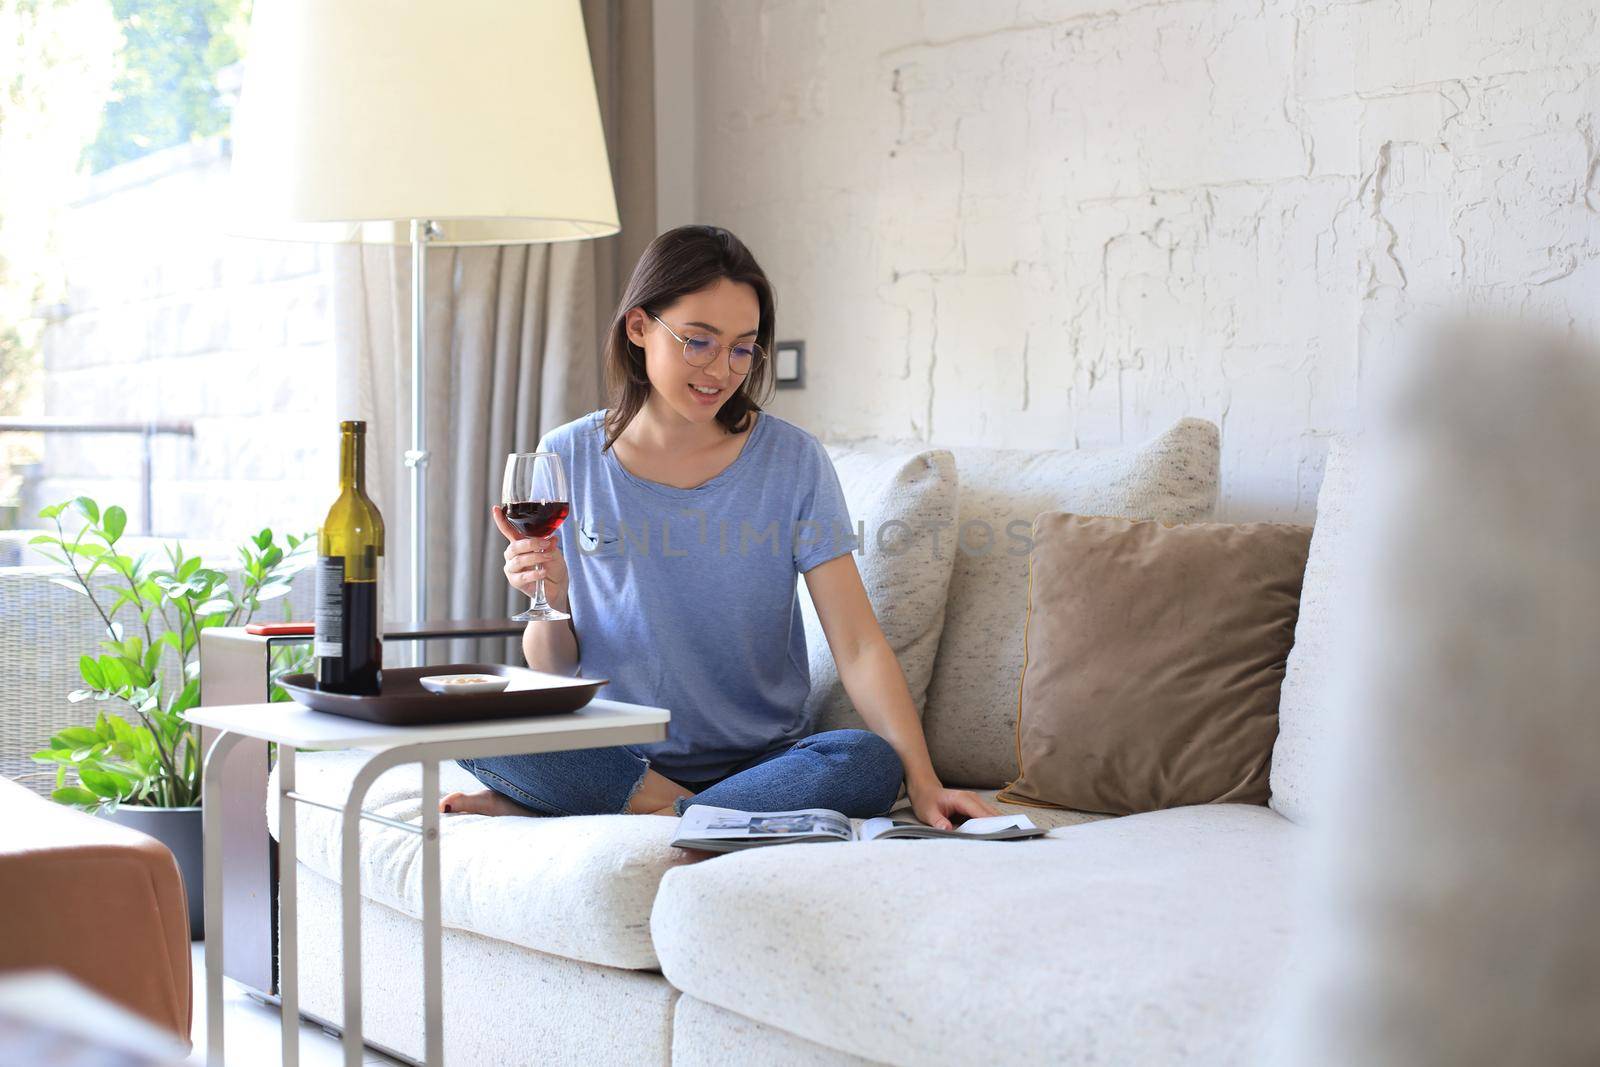 Successful young beautiful woman sitting on a sofa in the living room, drinking red wine